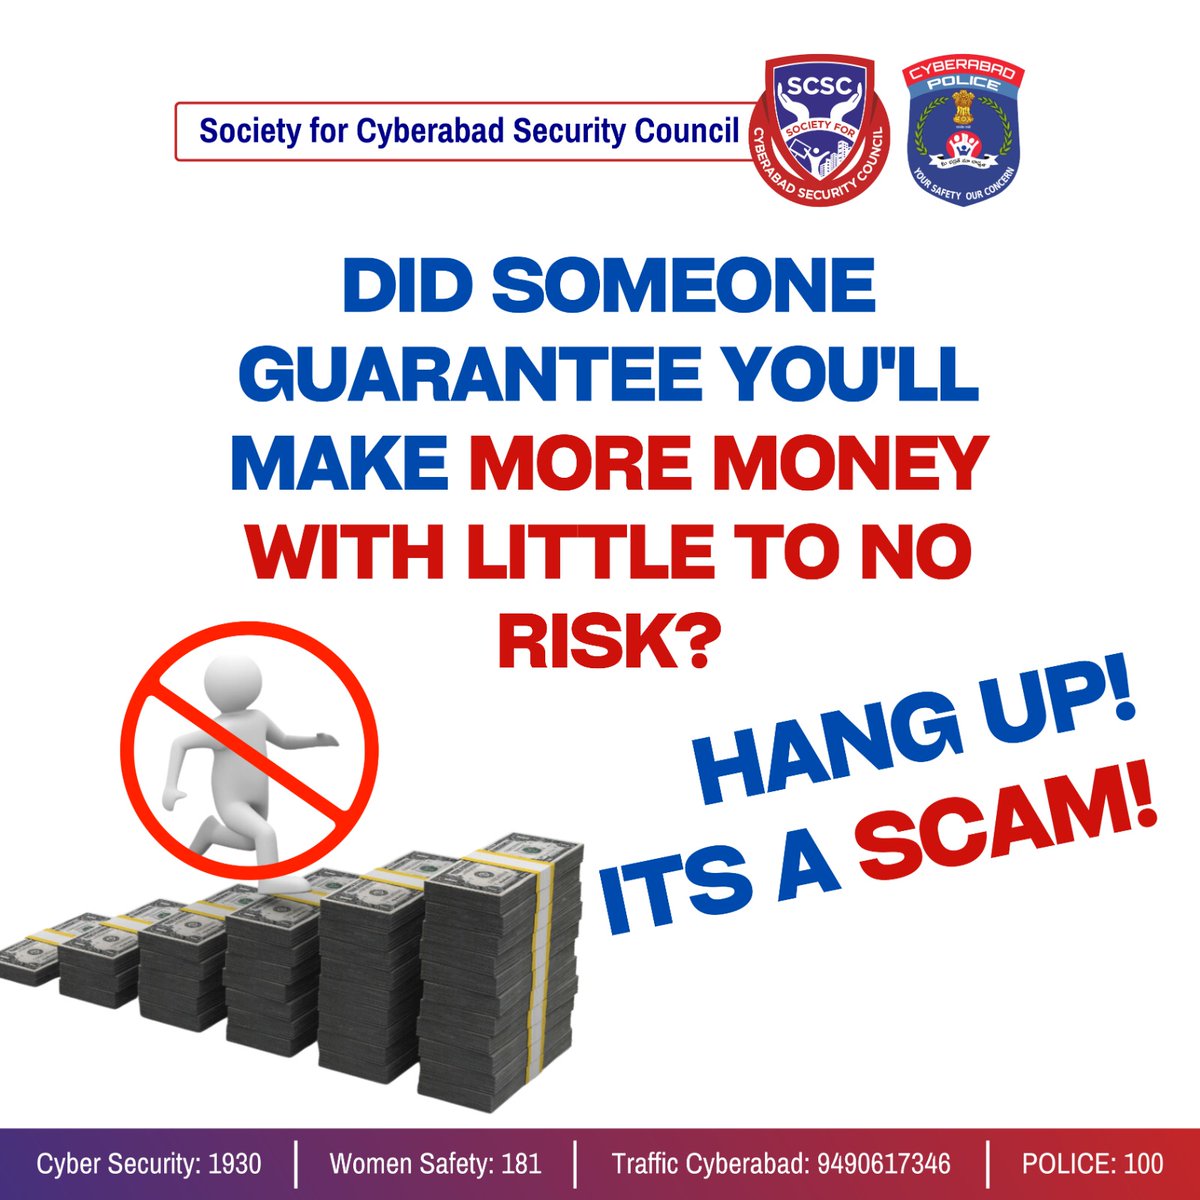 Scam Alert! 🚨
 
 No-risk, high-reward promises over the phone? It's a scam! 
 
 Stay vigilant, hang up, and report the fraud.

 Let's protect each other from scams. 
 
 #ScamWarning #HangUpScams #StaySafe #ScamAwareness  #ProtectYourWallet #bealert #besecure #cyberbullying